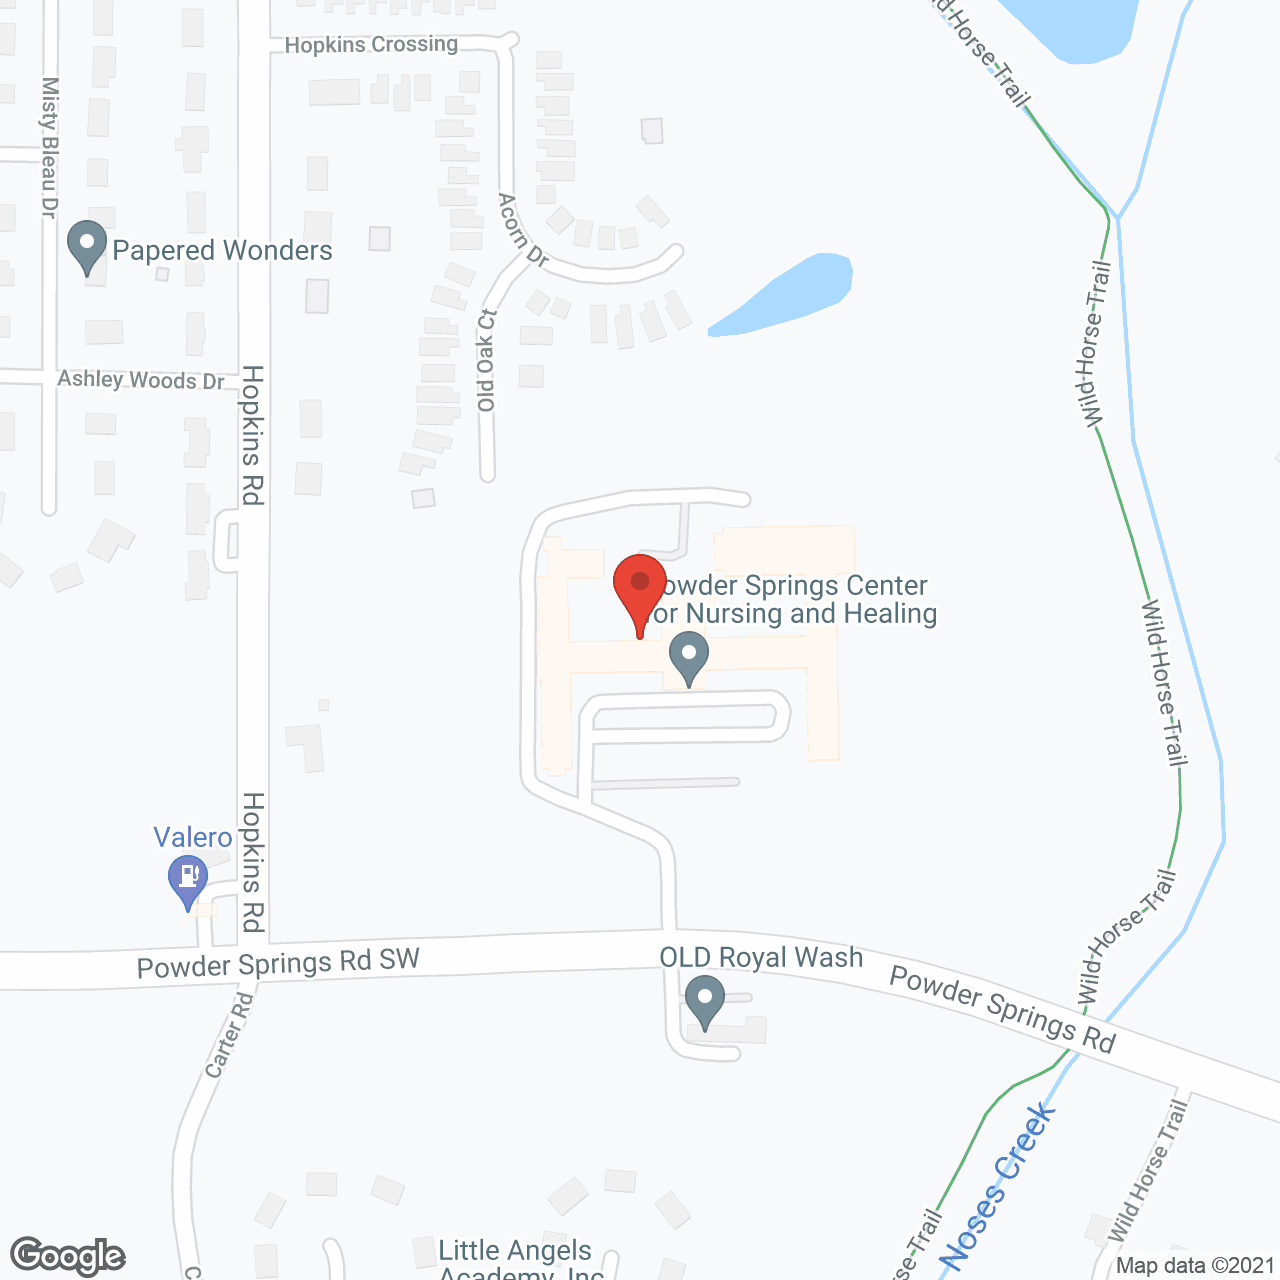 Powder Springs Center for Nursing and Healing in google map